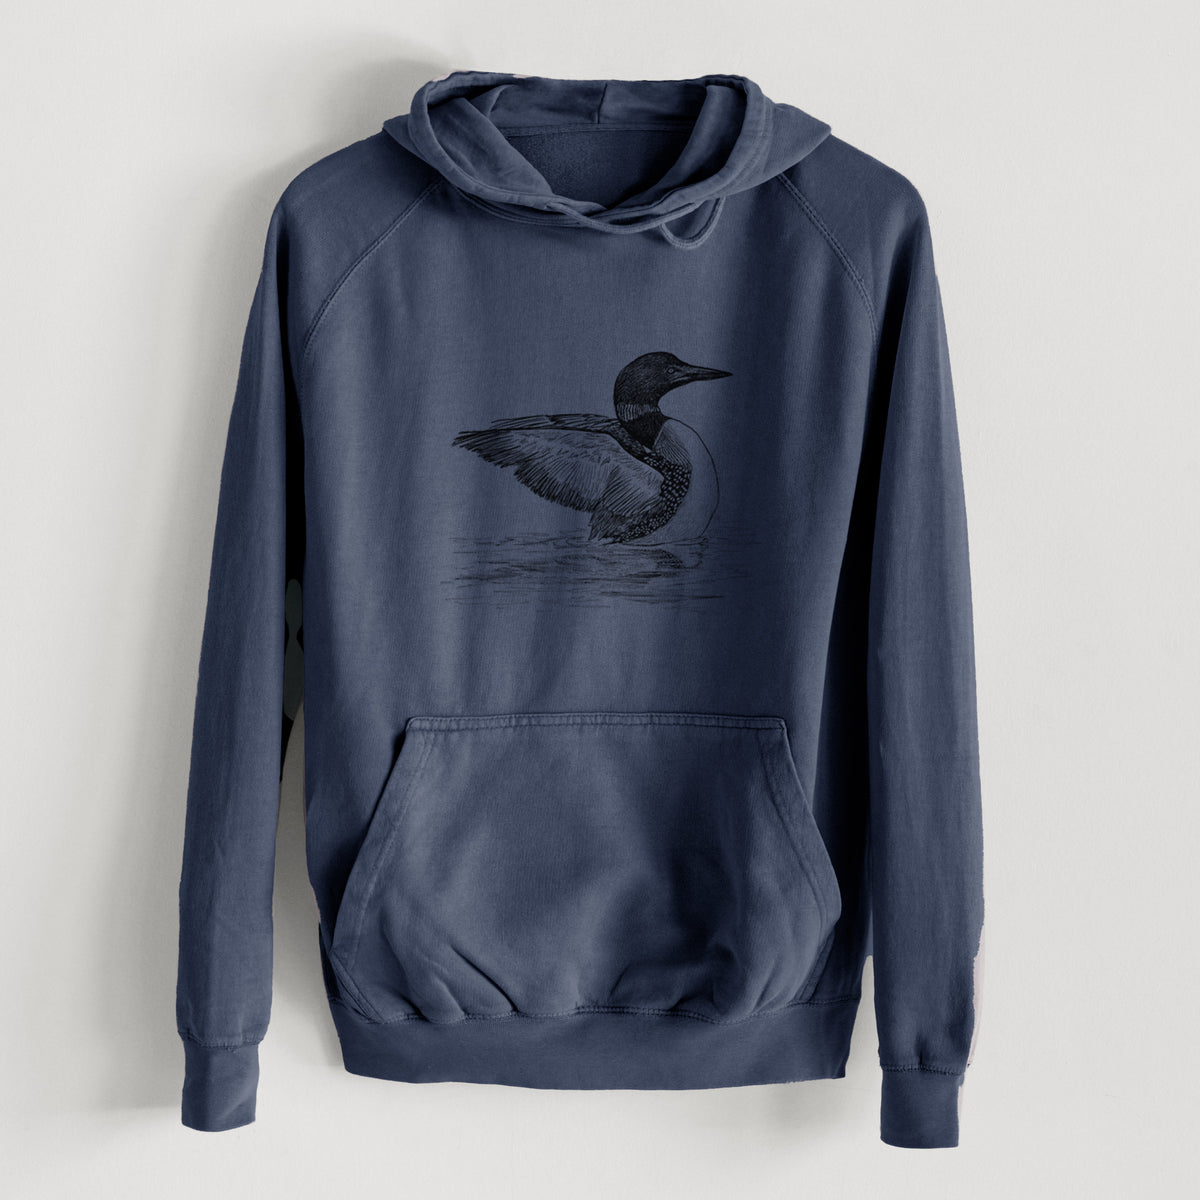 Common Loon - Gavia immer  - Mid-Weight Unisex Vintage 100% Cotton Hoodie